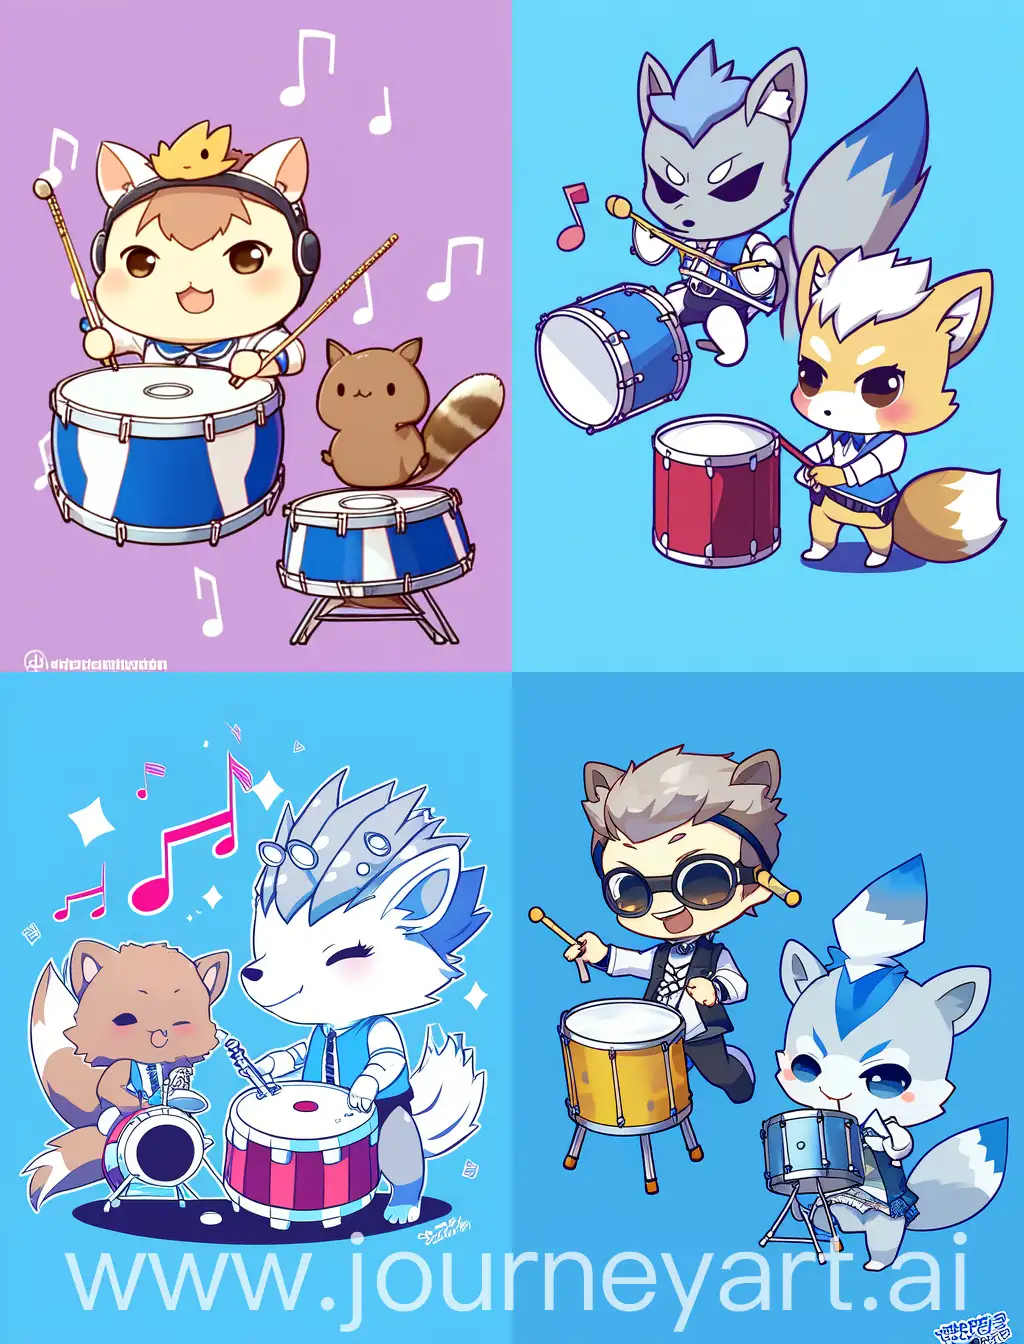 Chibi-Squirrel-and-Anime-Guy-Drumming-in-Vibrant-Blue-Setting